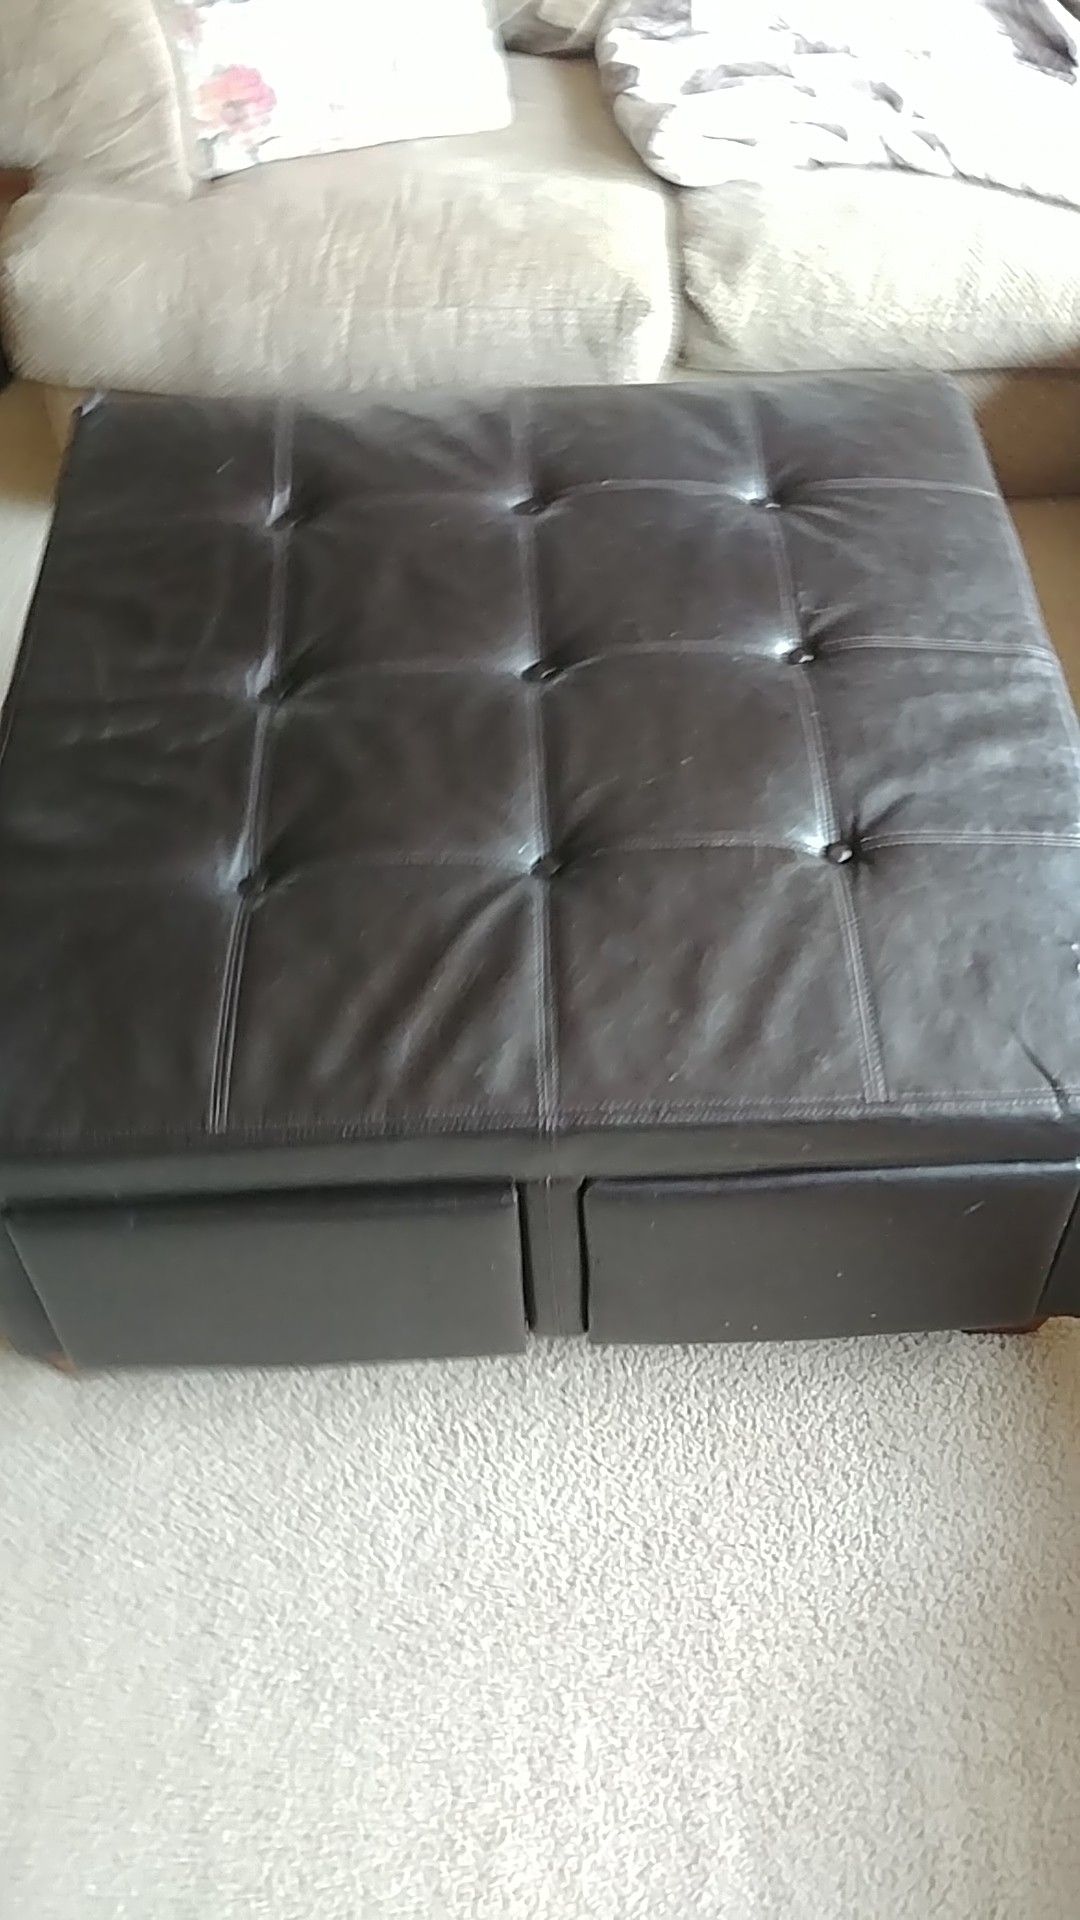 Free: Leather ottoman with 4 storage drawers. Tear on one corner.